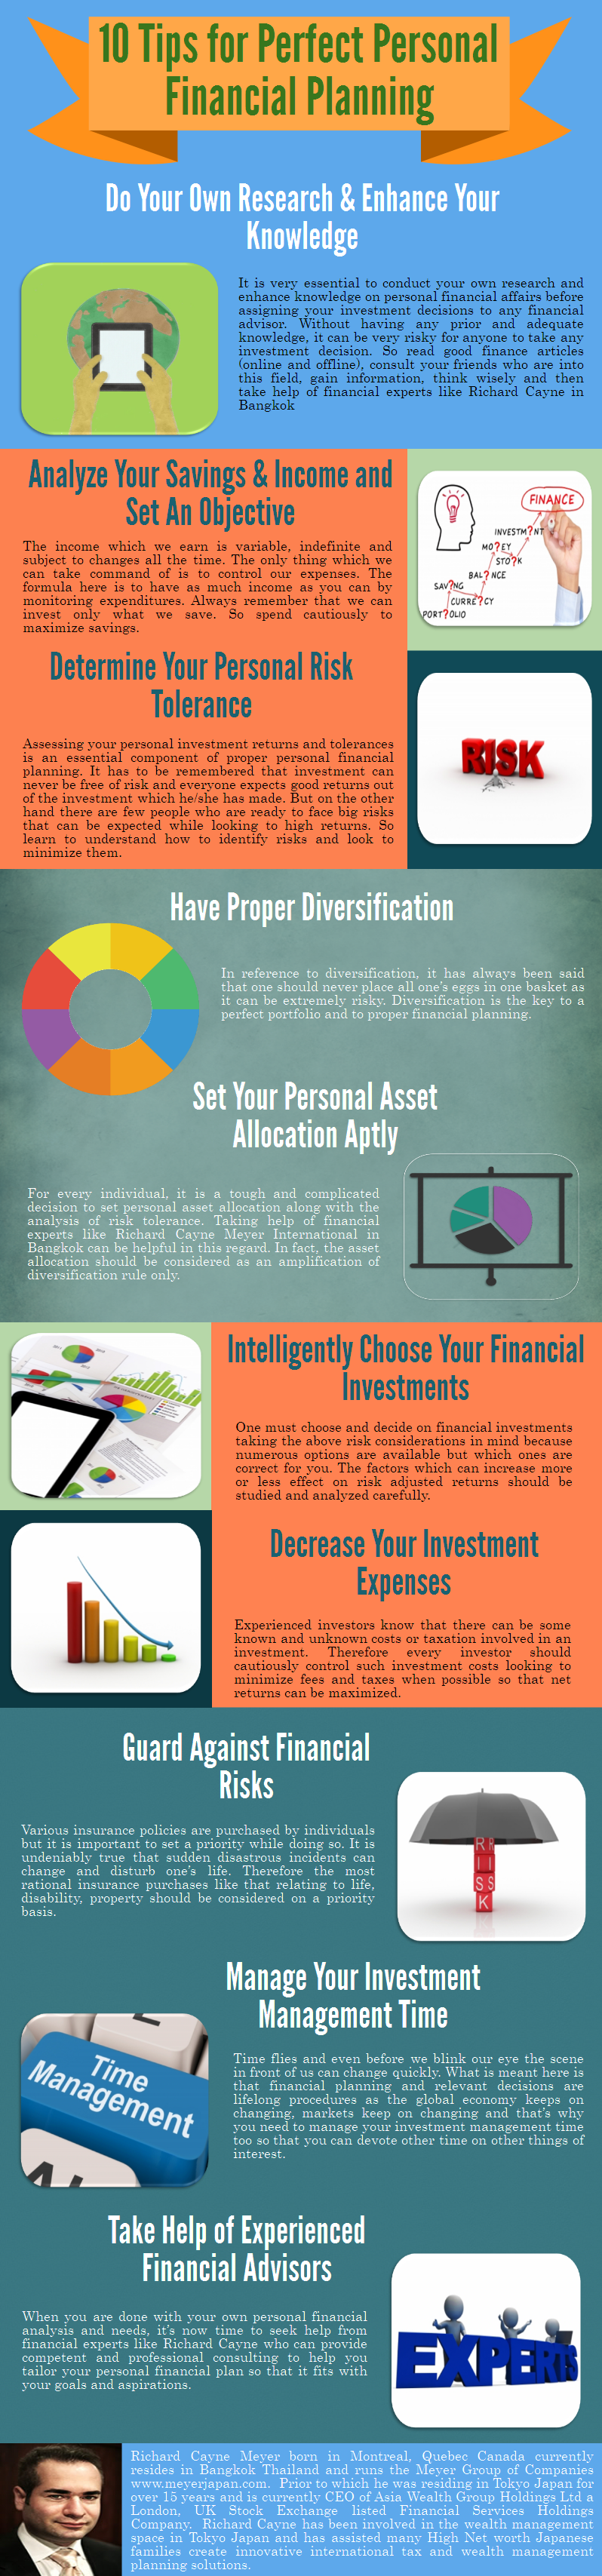 10 Tips for Perfect Personal Financial Planning